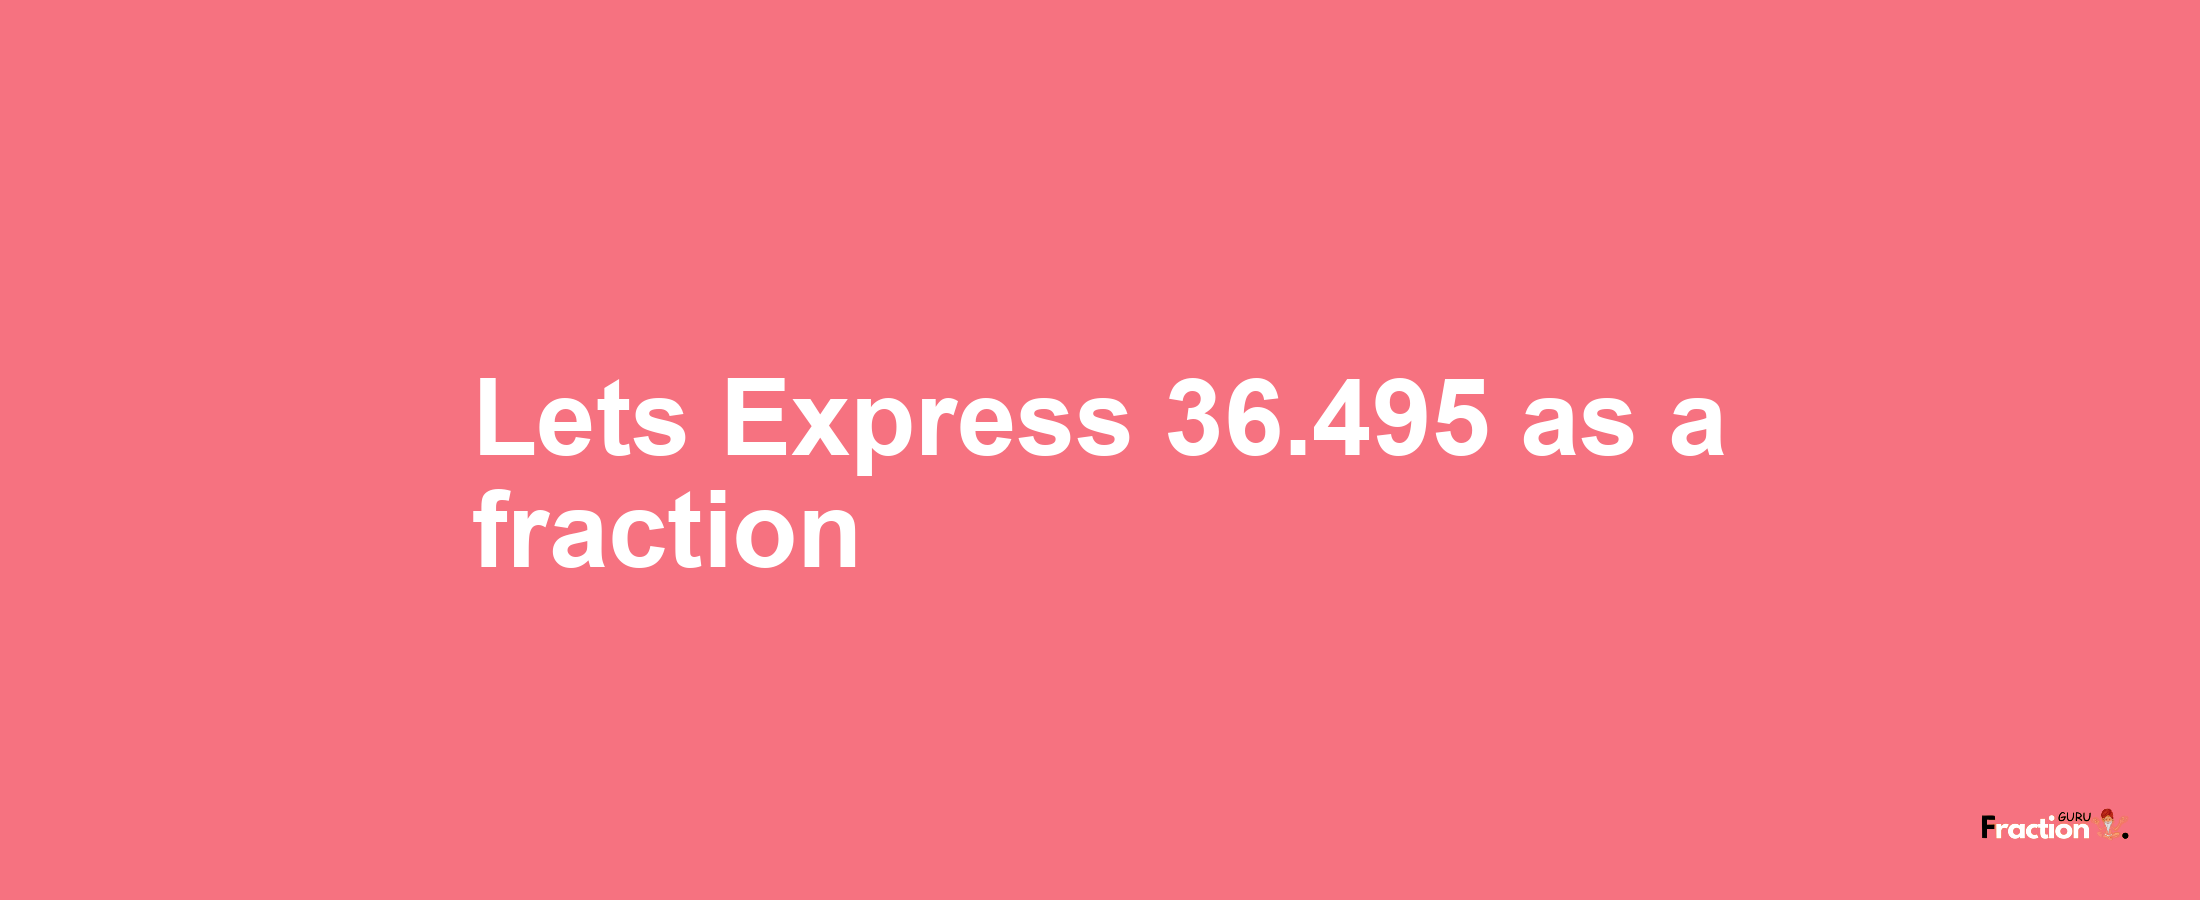 Lets Express 36.495 as afraction